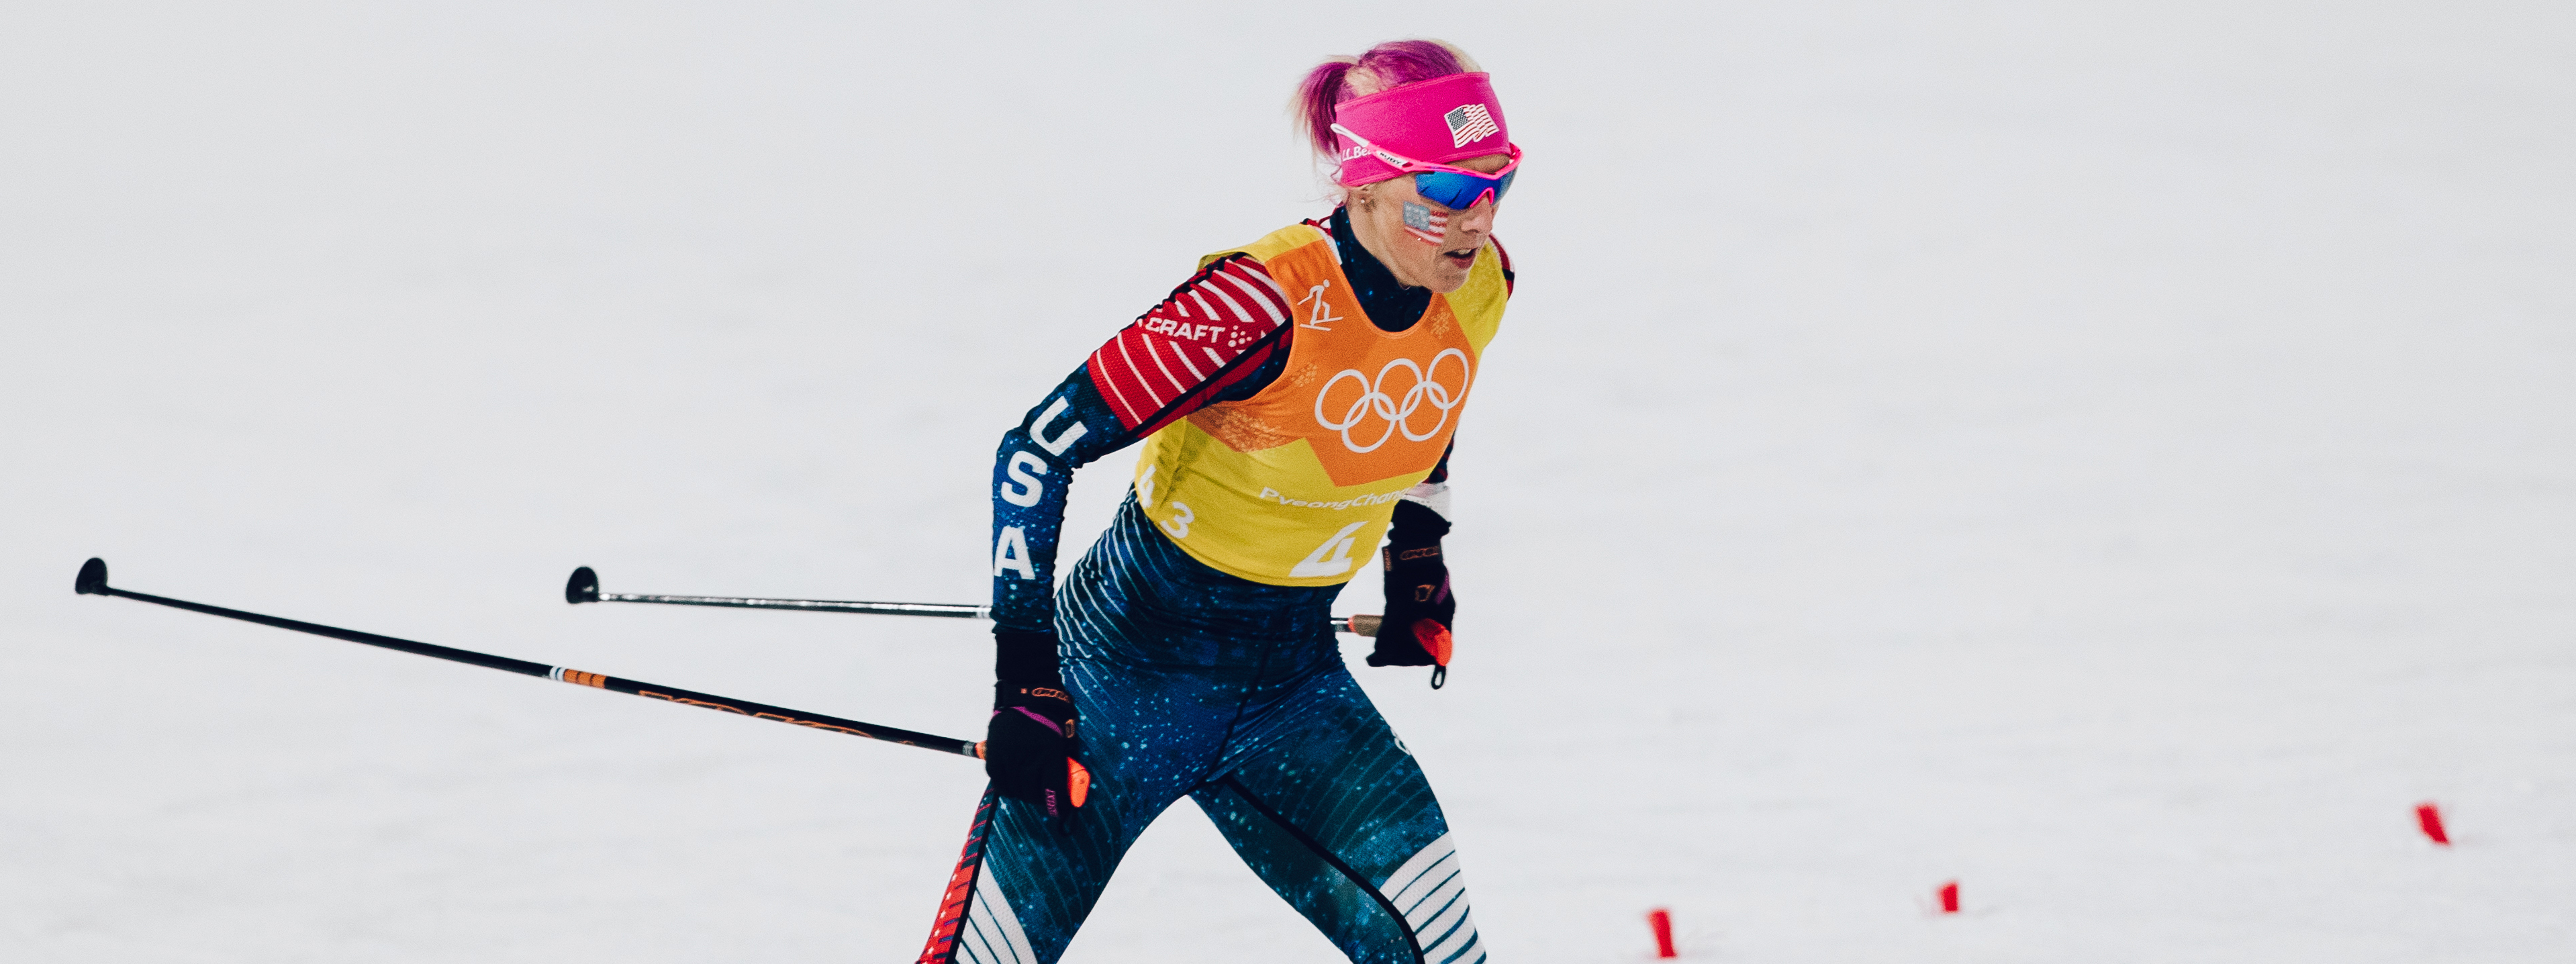 Kikkan Randall skies in the cross country 4x5m Relay at the 2018 Olympic Winter Games in PyeongChang